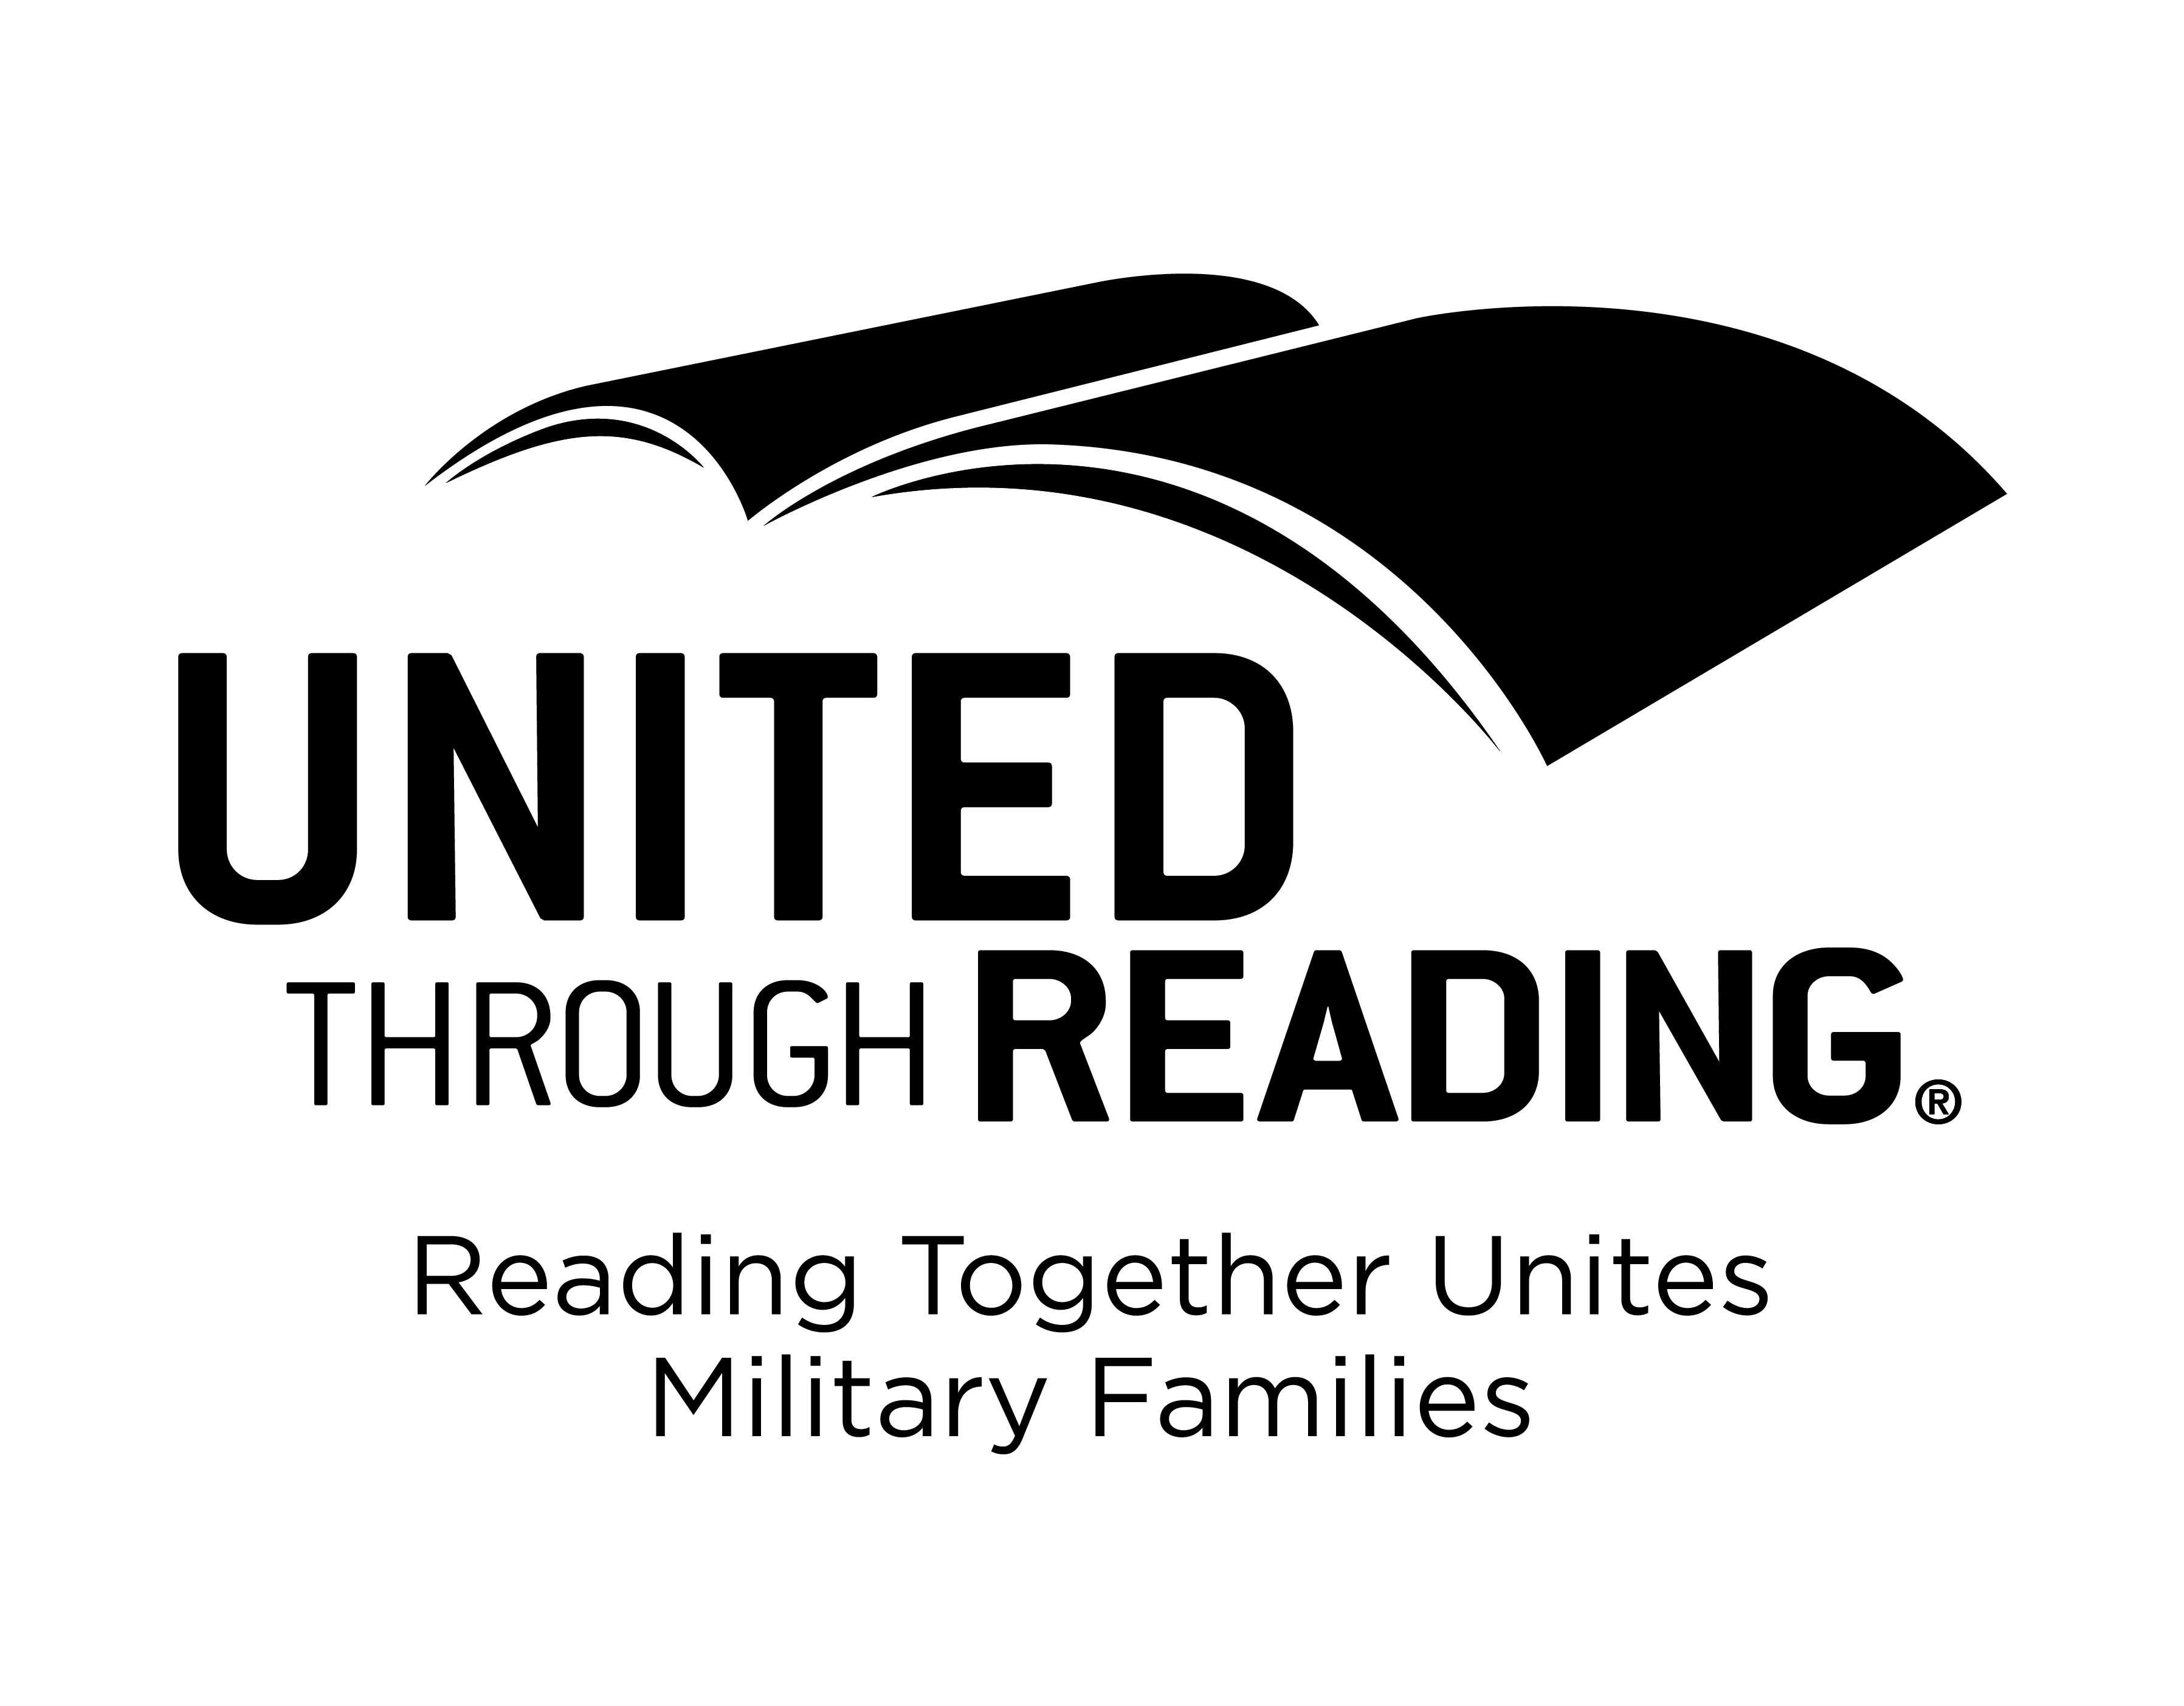 United Through Reading Reading Together Unites Military Families